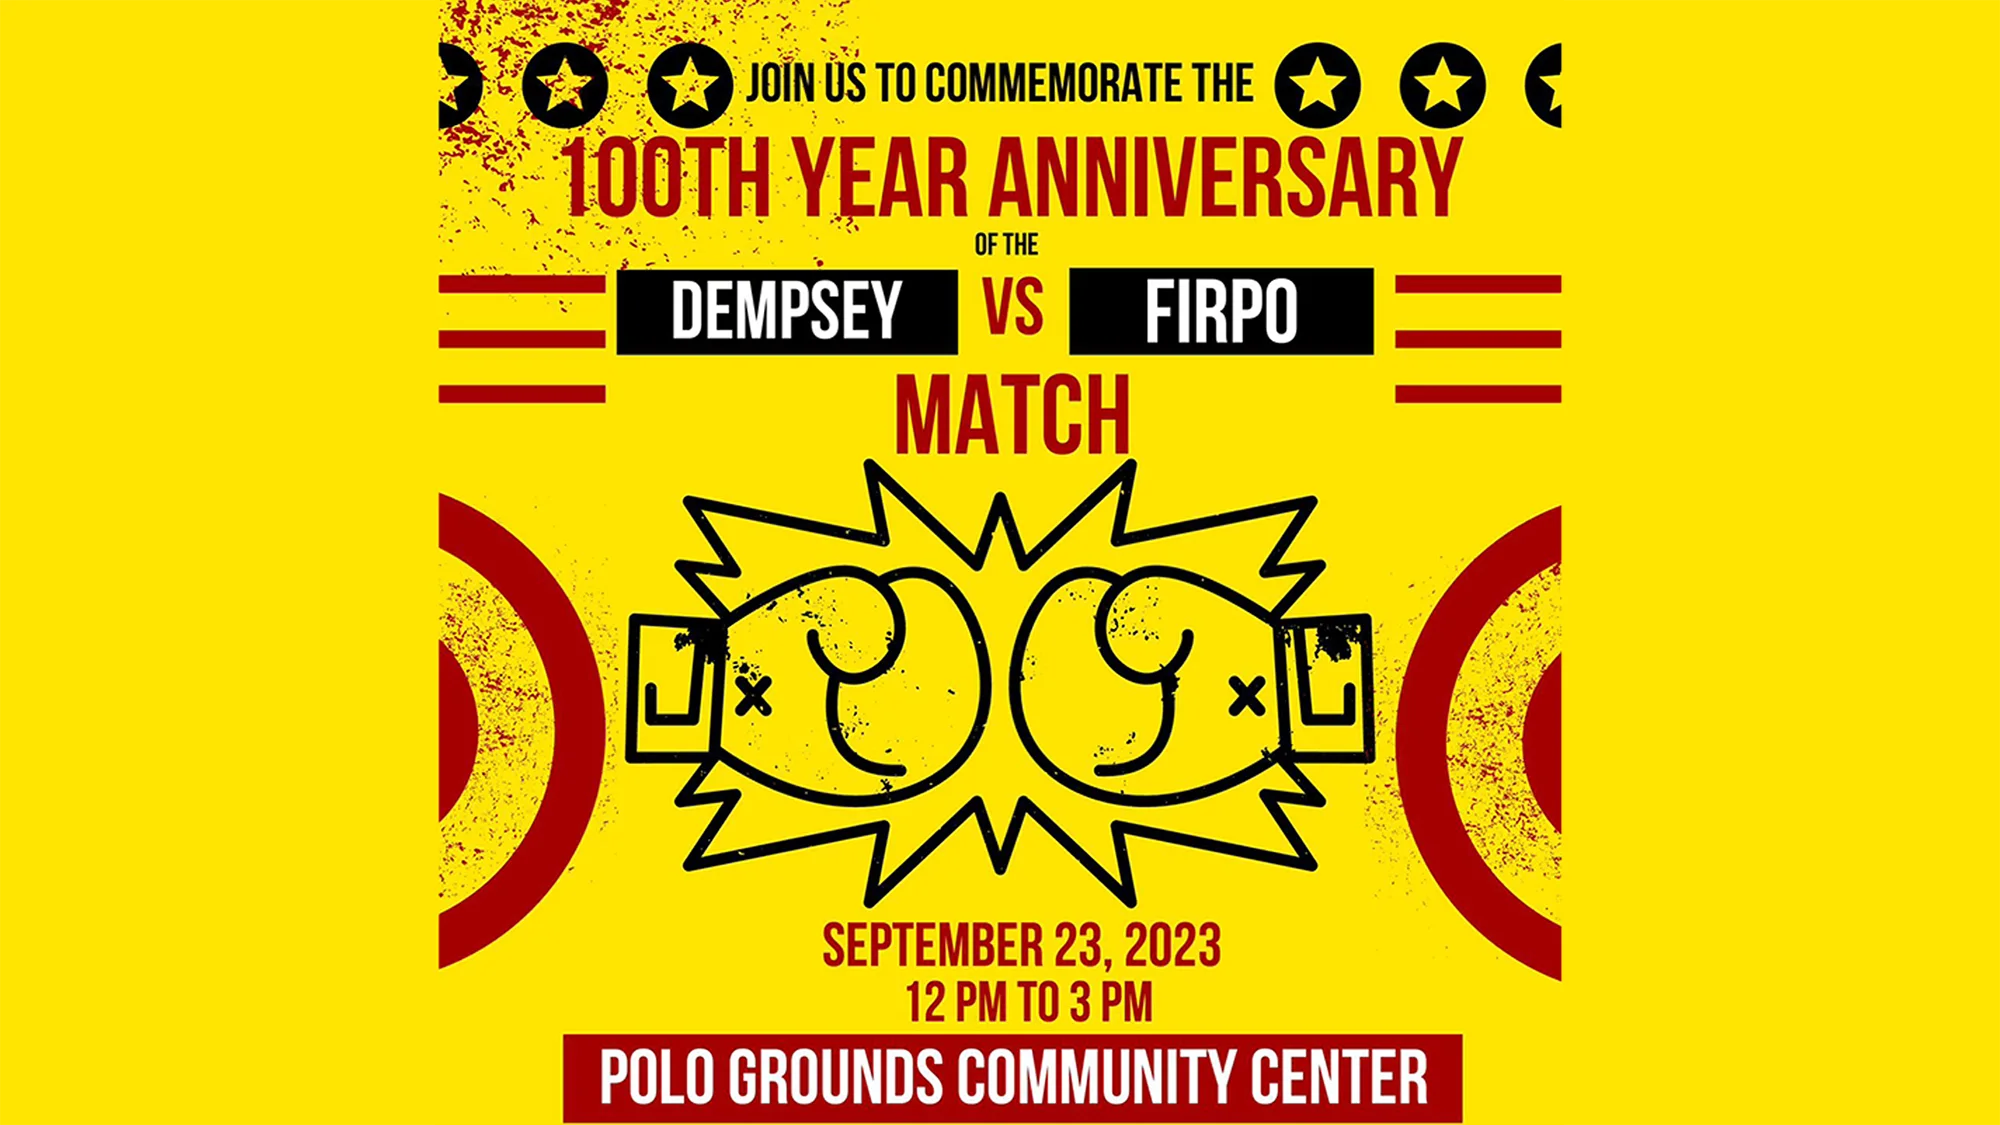 Dempsey vs. Firpo Centennial Celebration: A Tribute to the ‘Fight of the Century